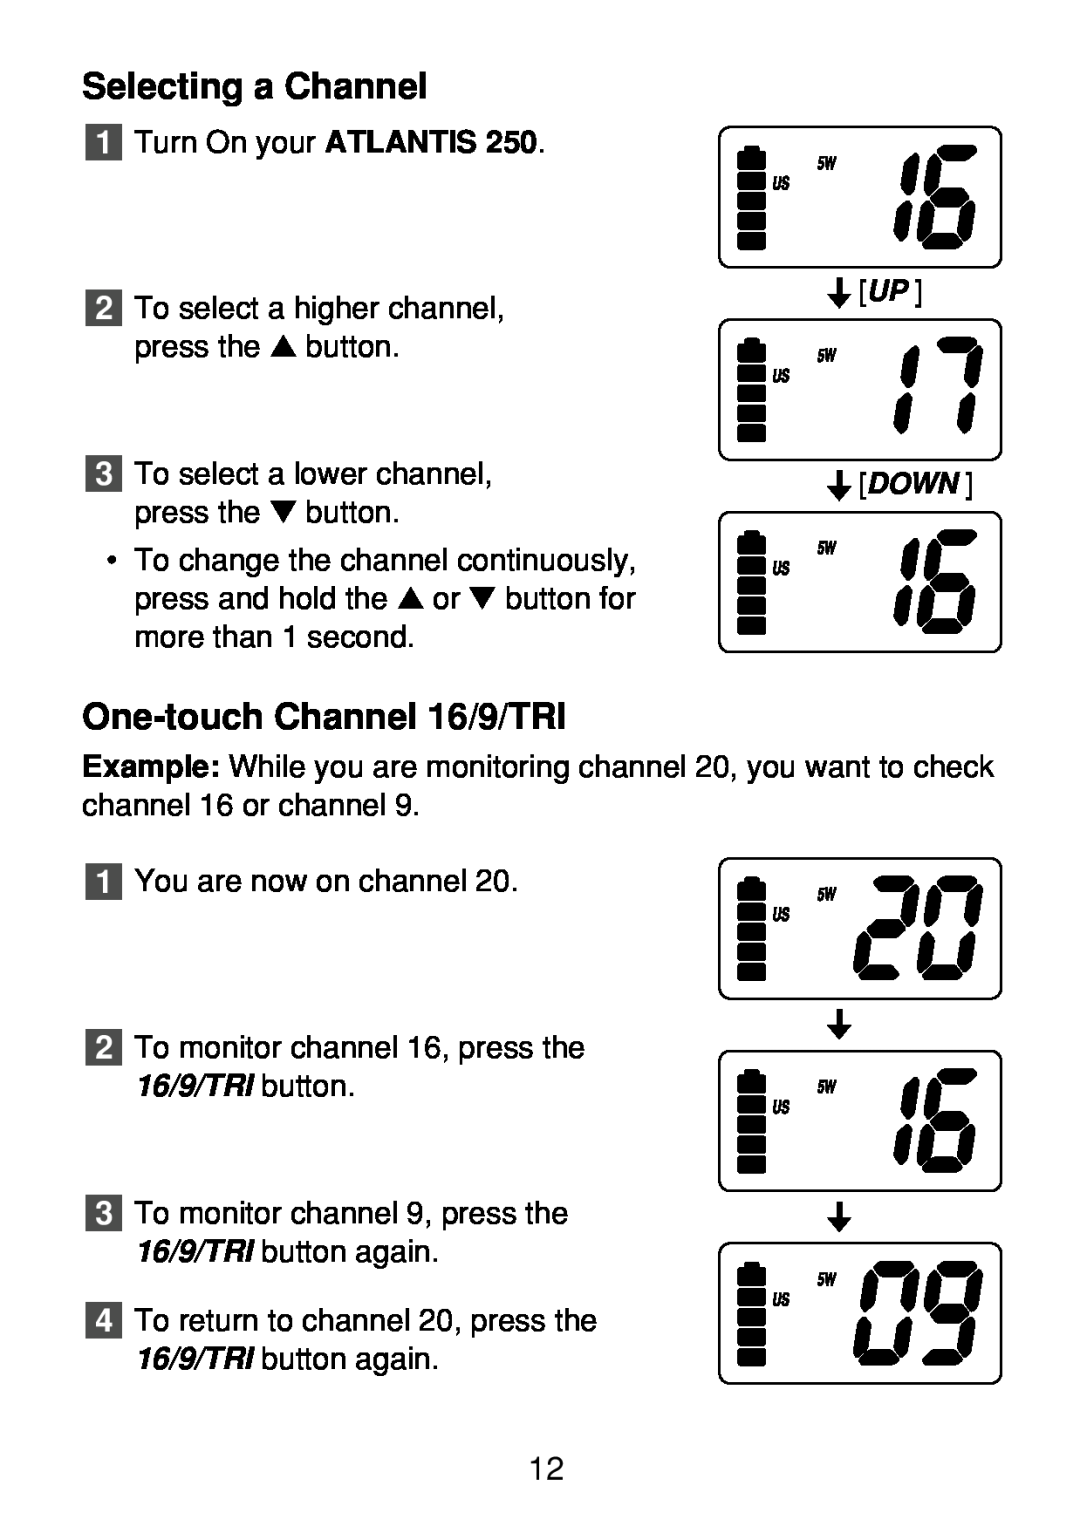 Uniden 250 manual Selecting a Channel, One-touchChannel 16/9/TRI, Up Down, 16/9/TRI button 